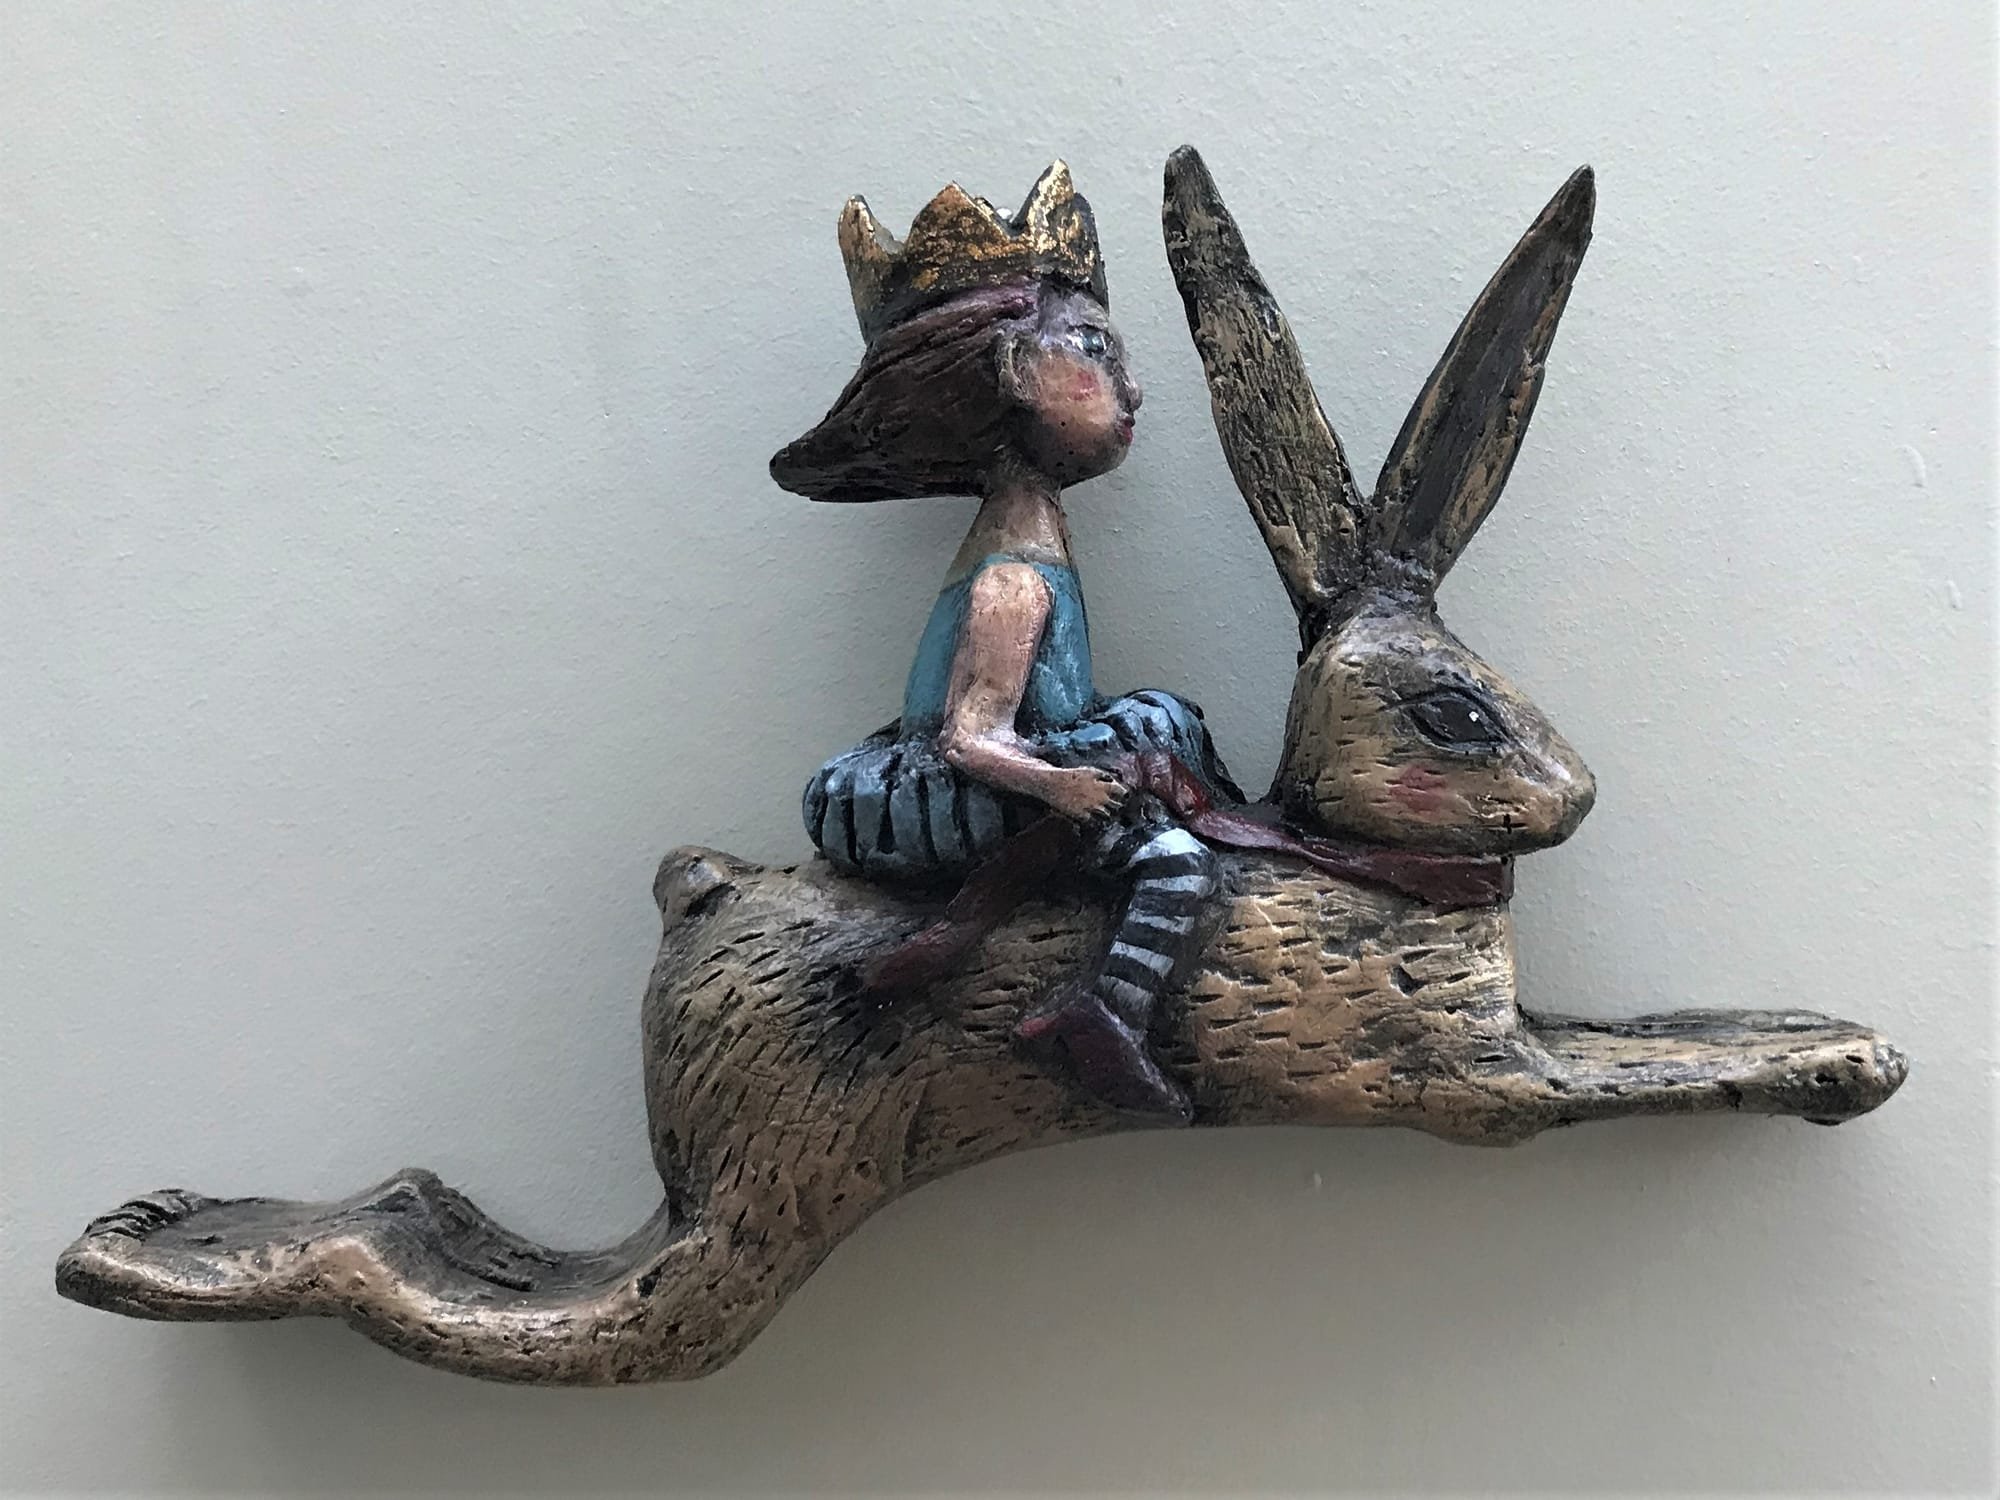 Magic Hare Hanging Ornament, Hand-Painted Wall Art by Judy Musselle.